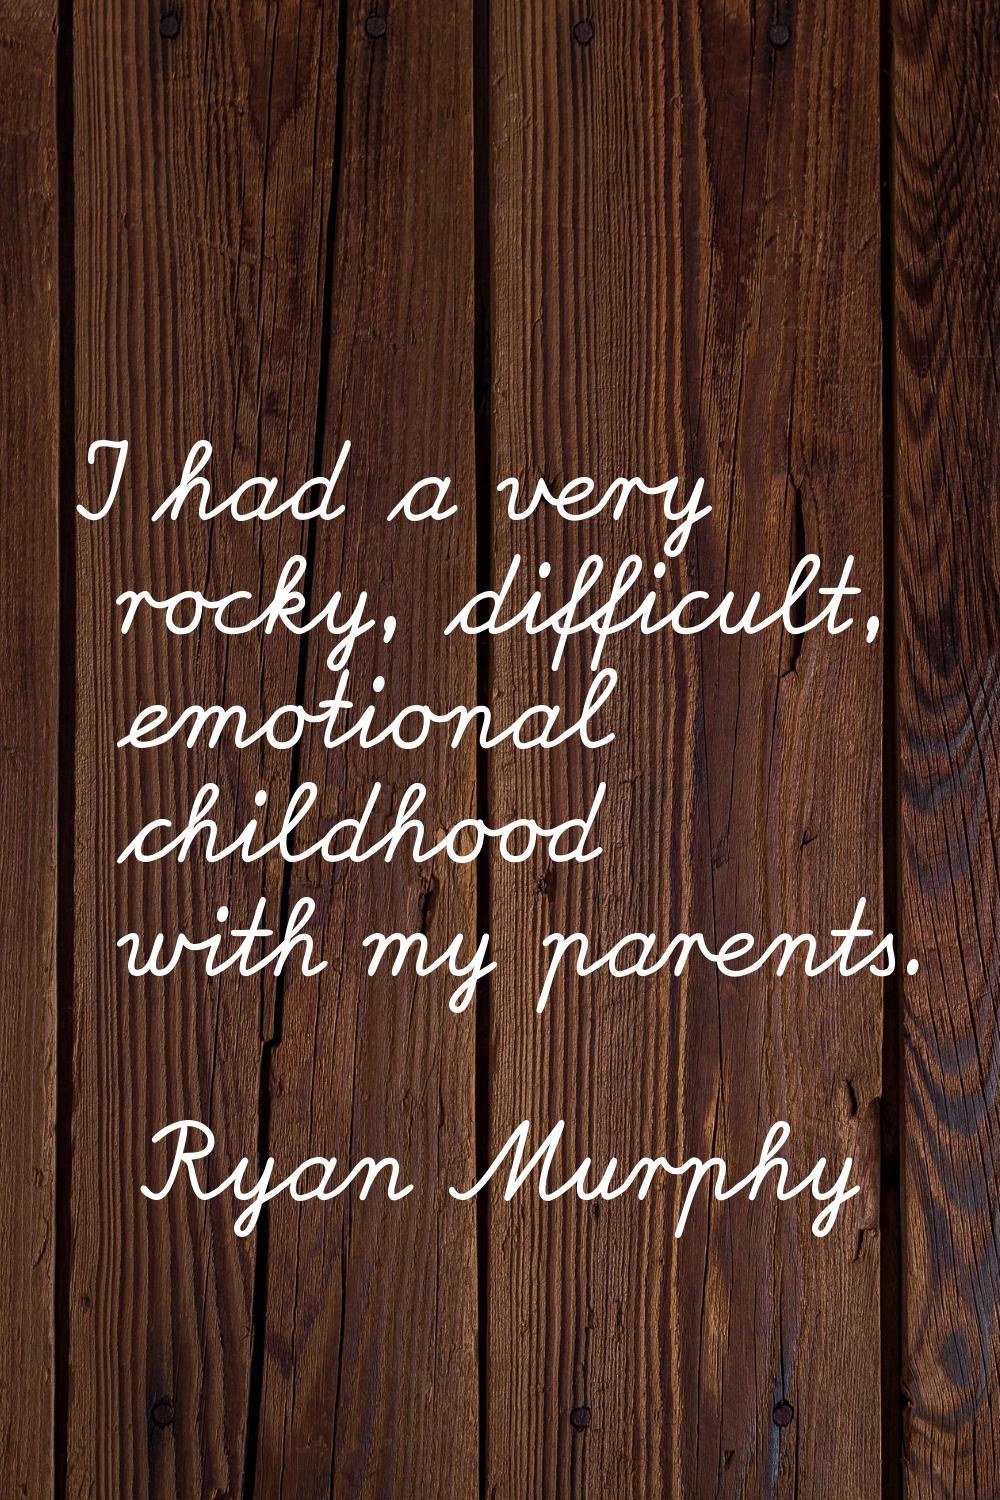 I had a very rocky, difficult, emotional childhood with my parents.